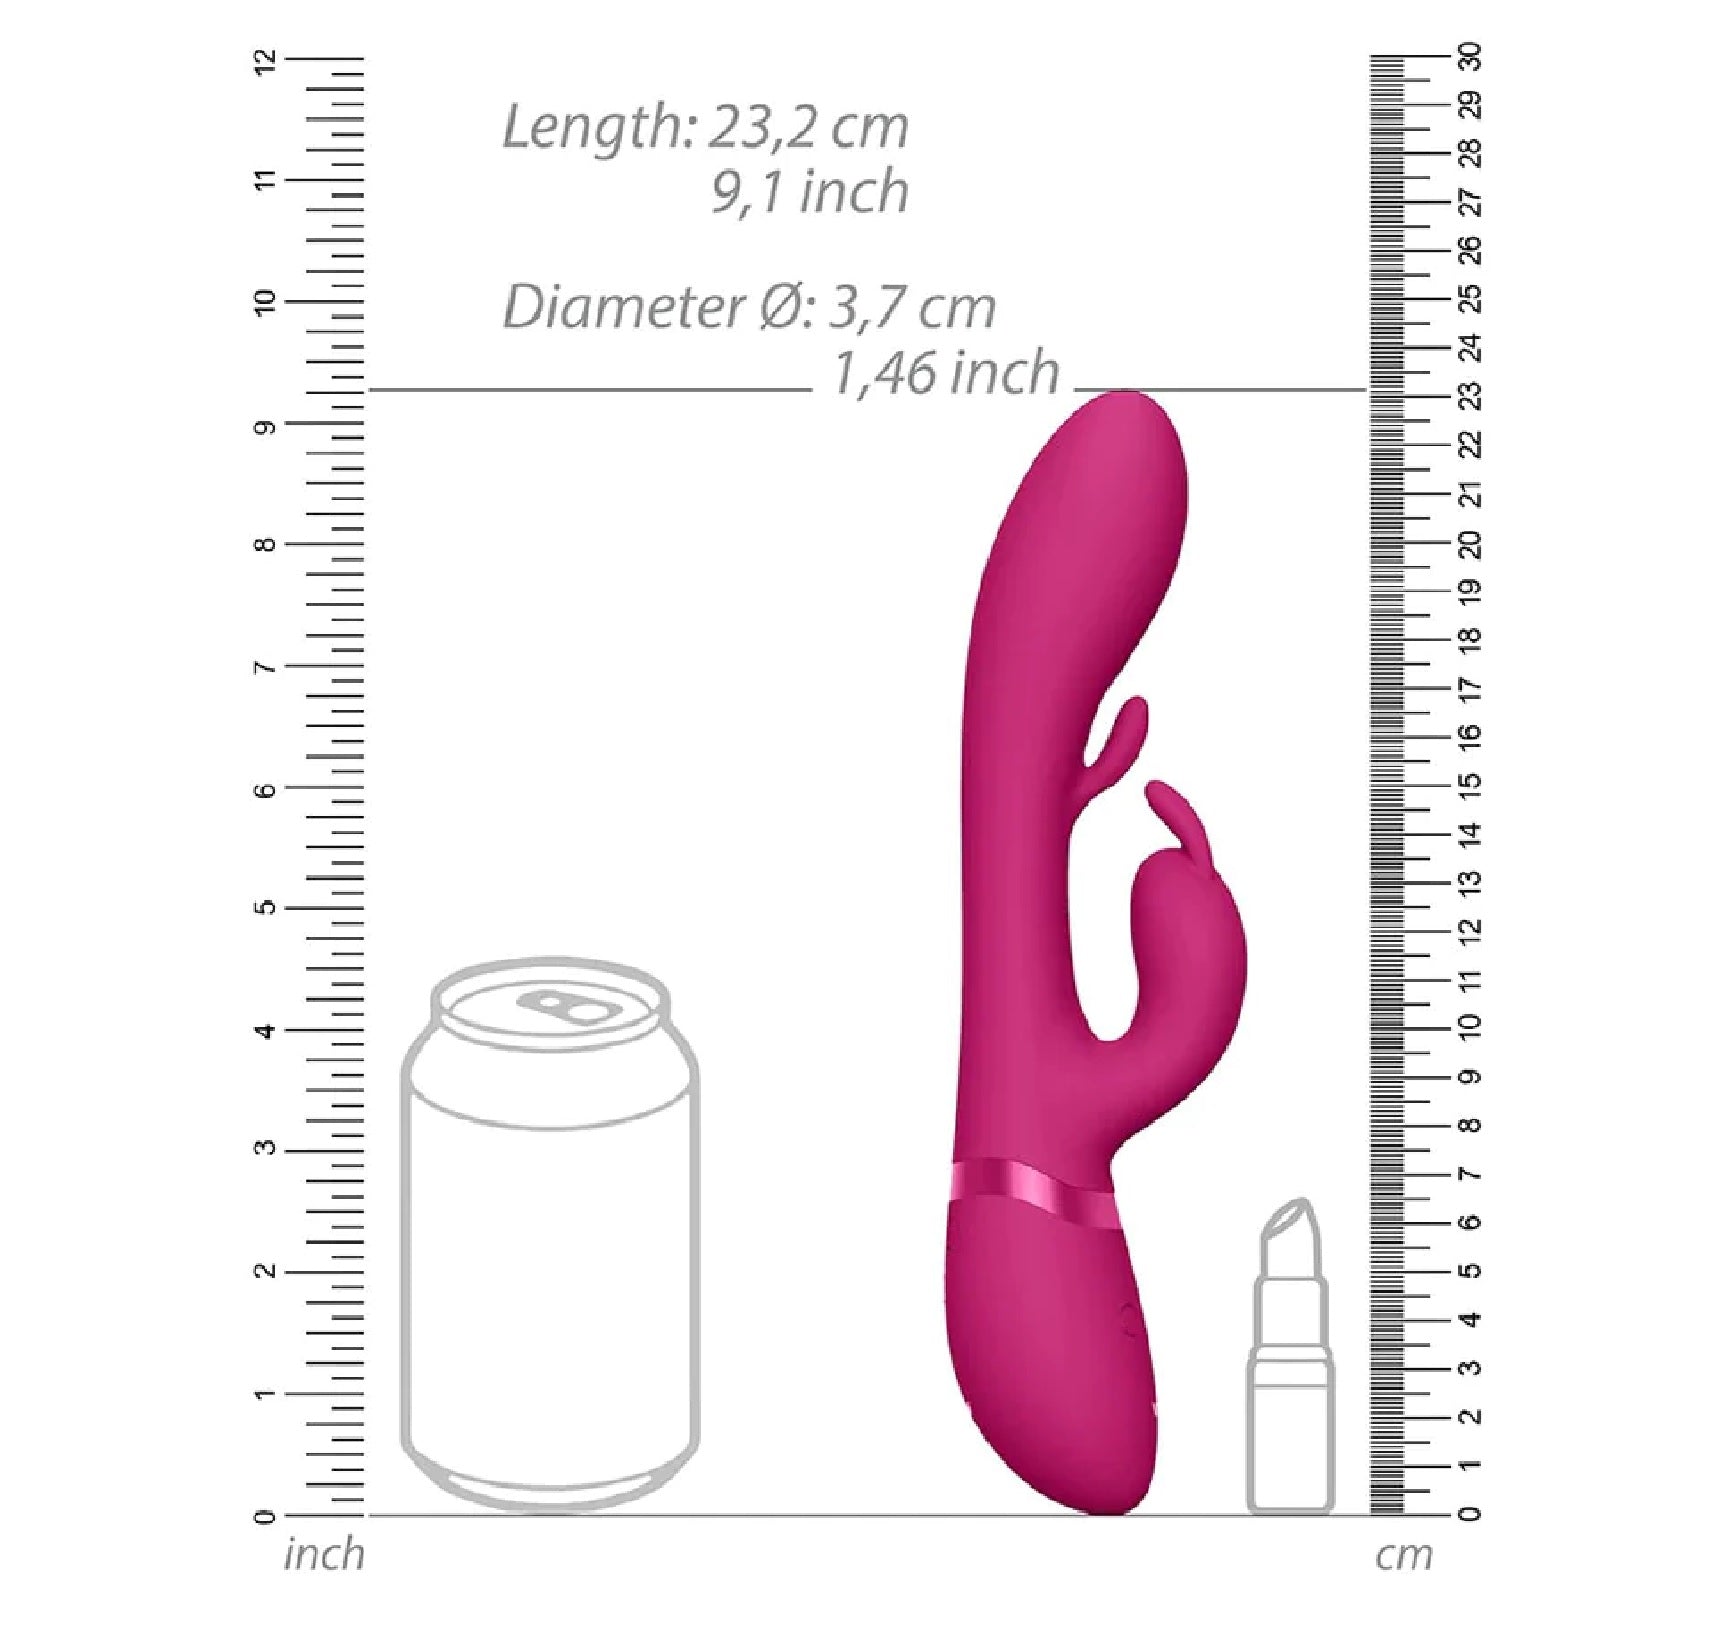 VIVE TAMA Rechargeable Wave Silicone Rabbit Vibrator - Pink